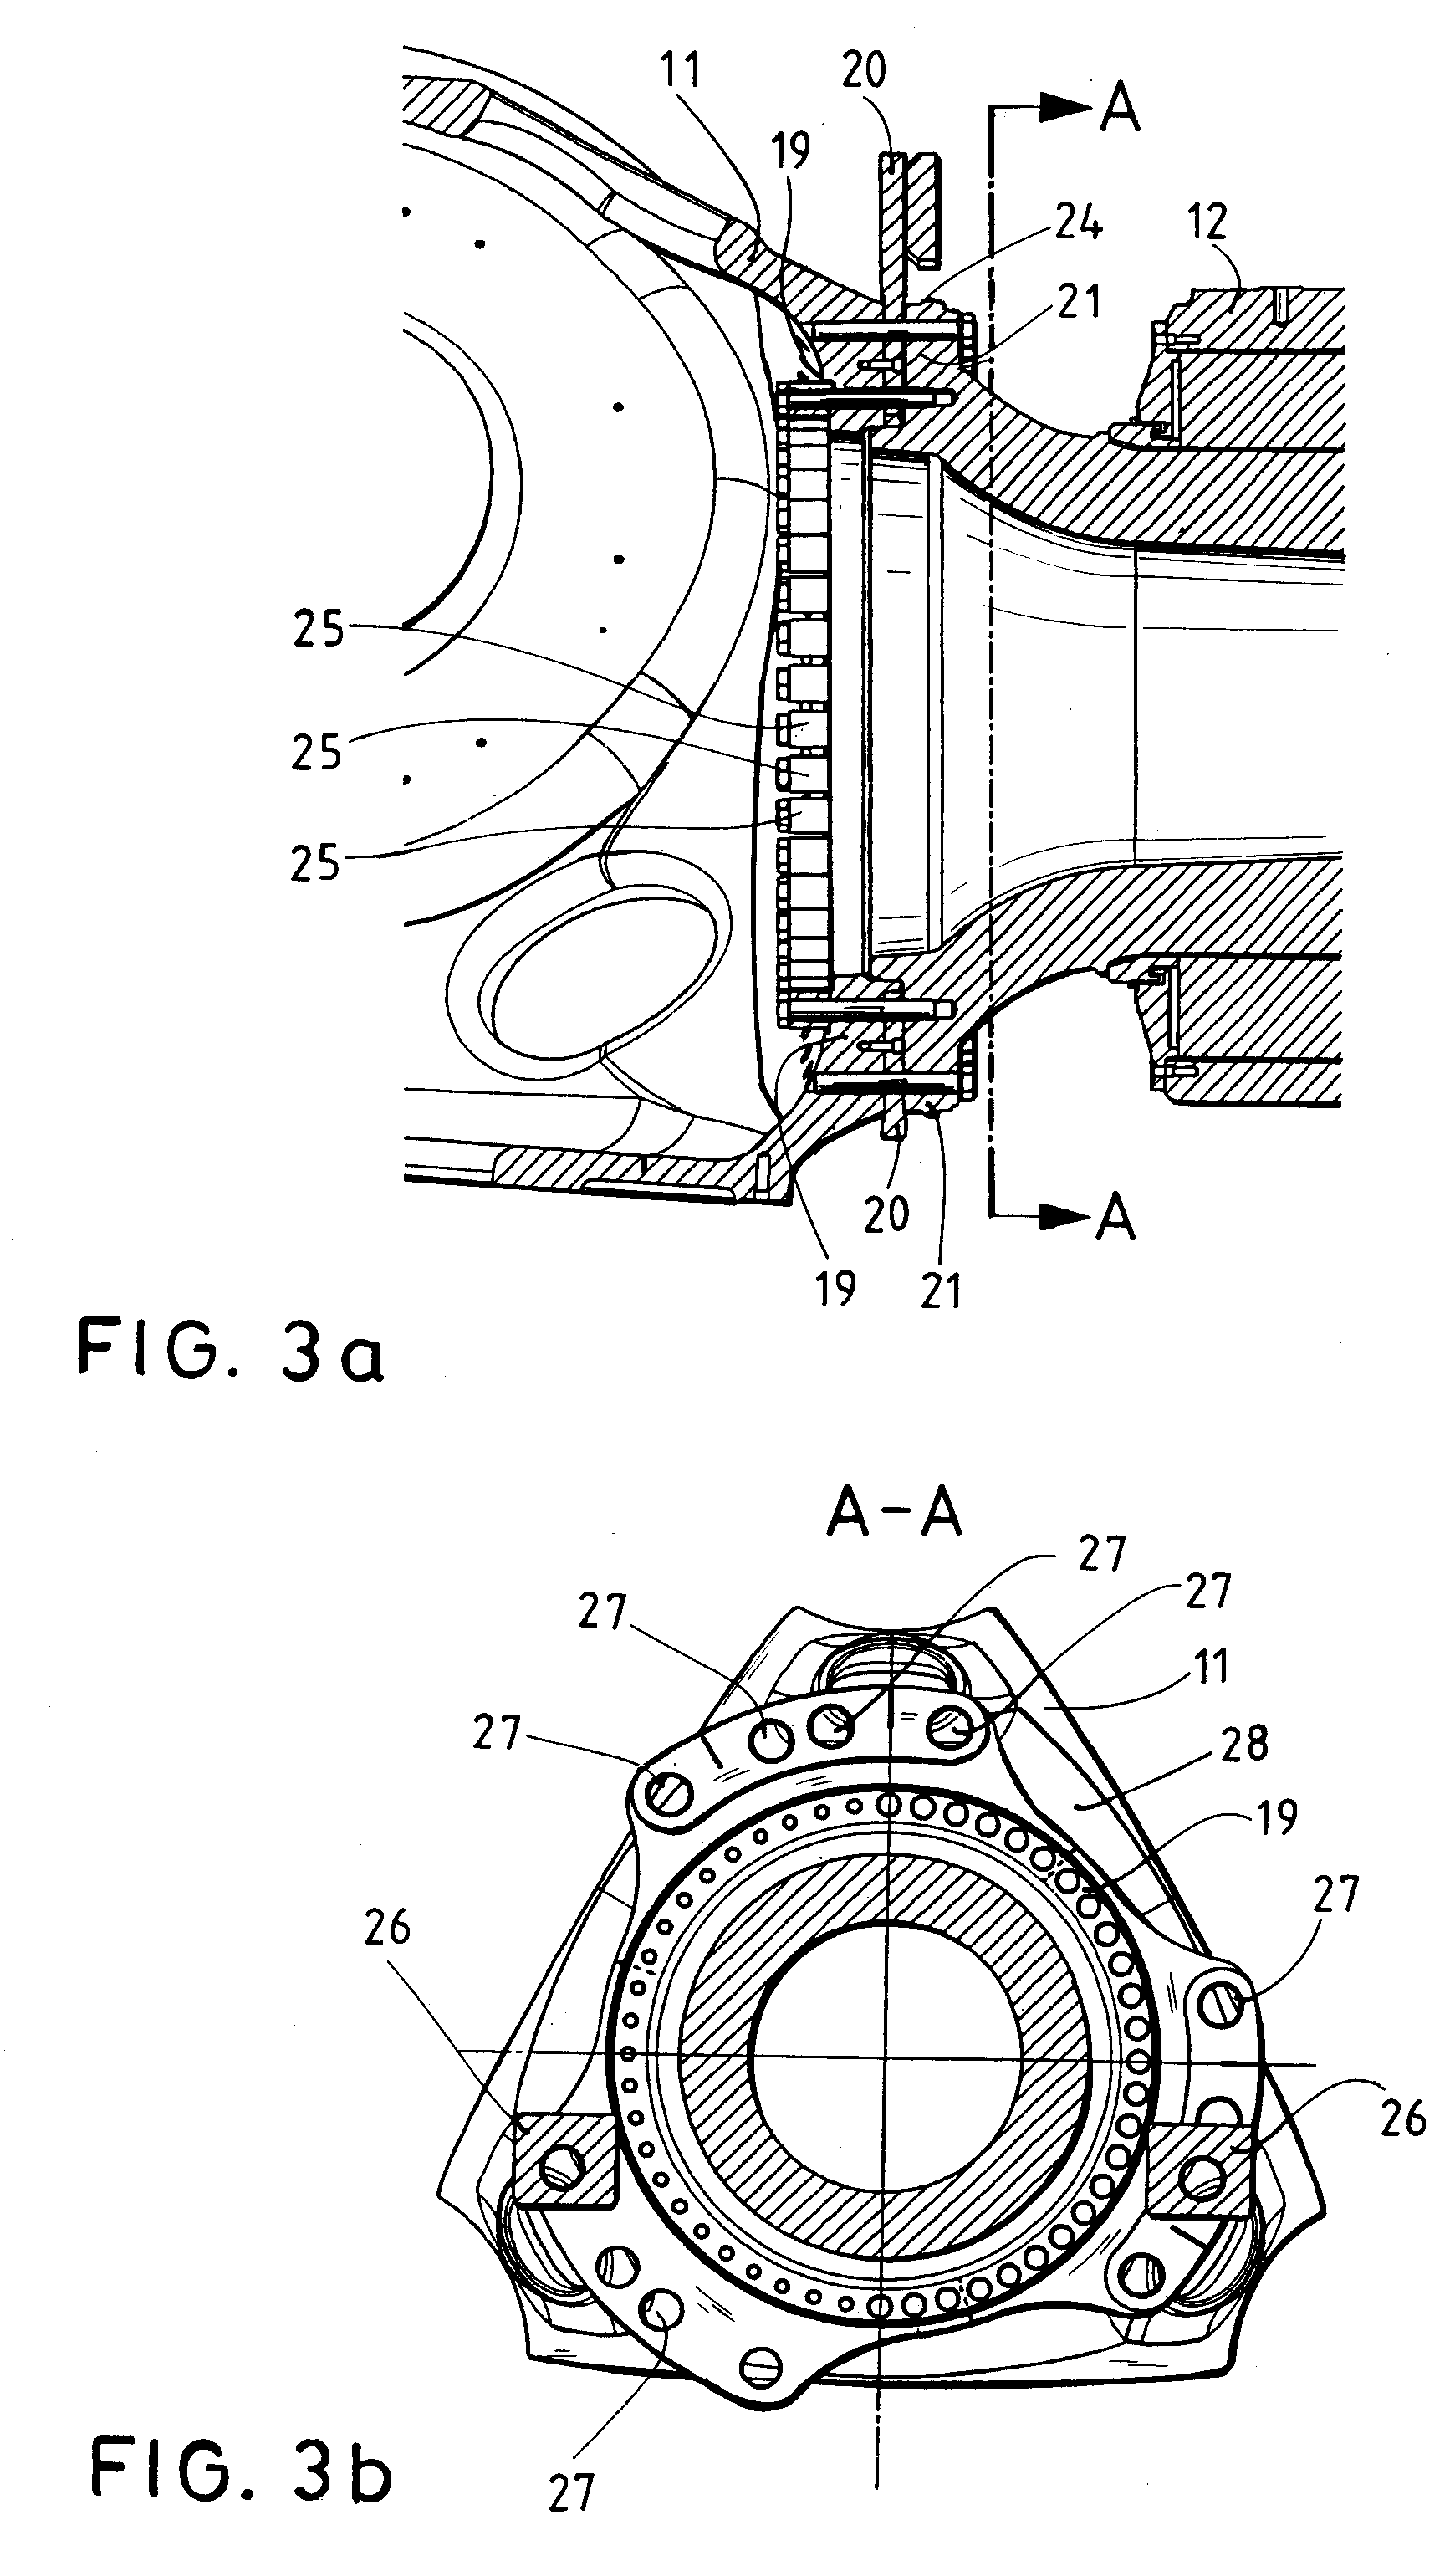 Connection of components of a wind turbine